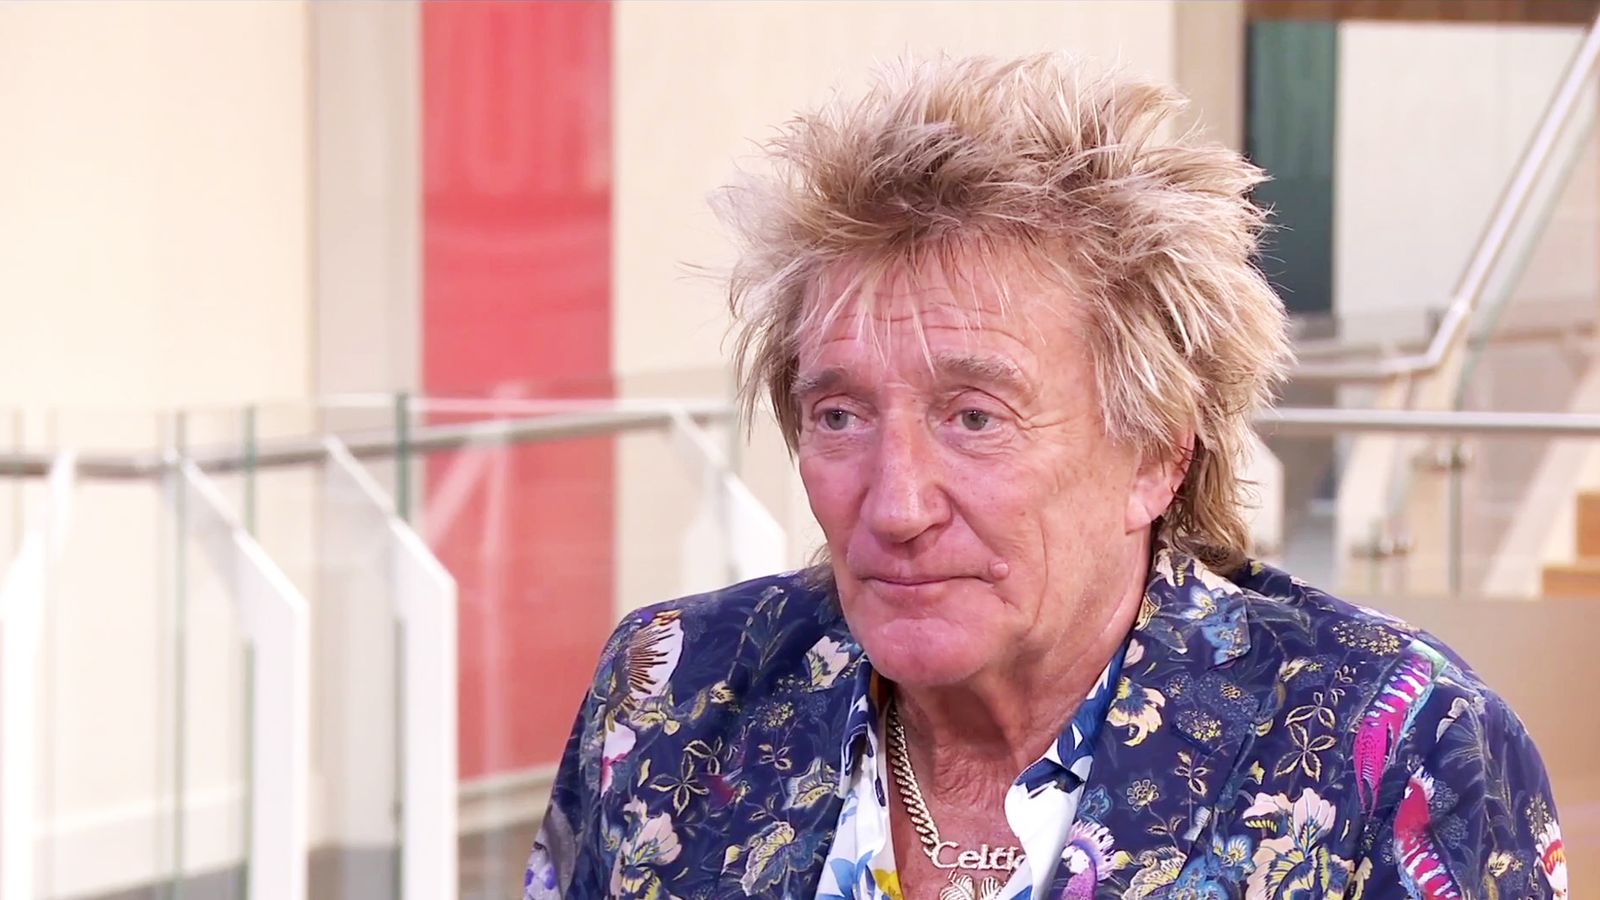 Sir Rod Stewart says Labour 'deserve a crack' at running the country 